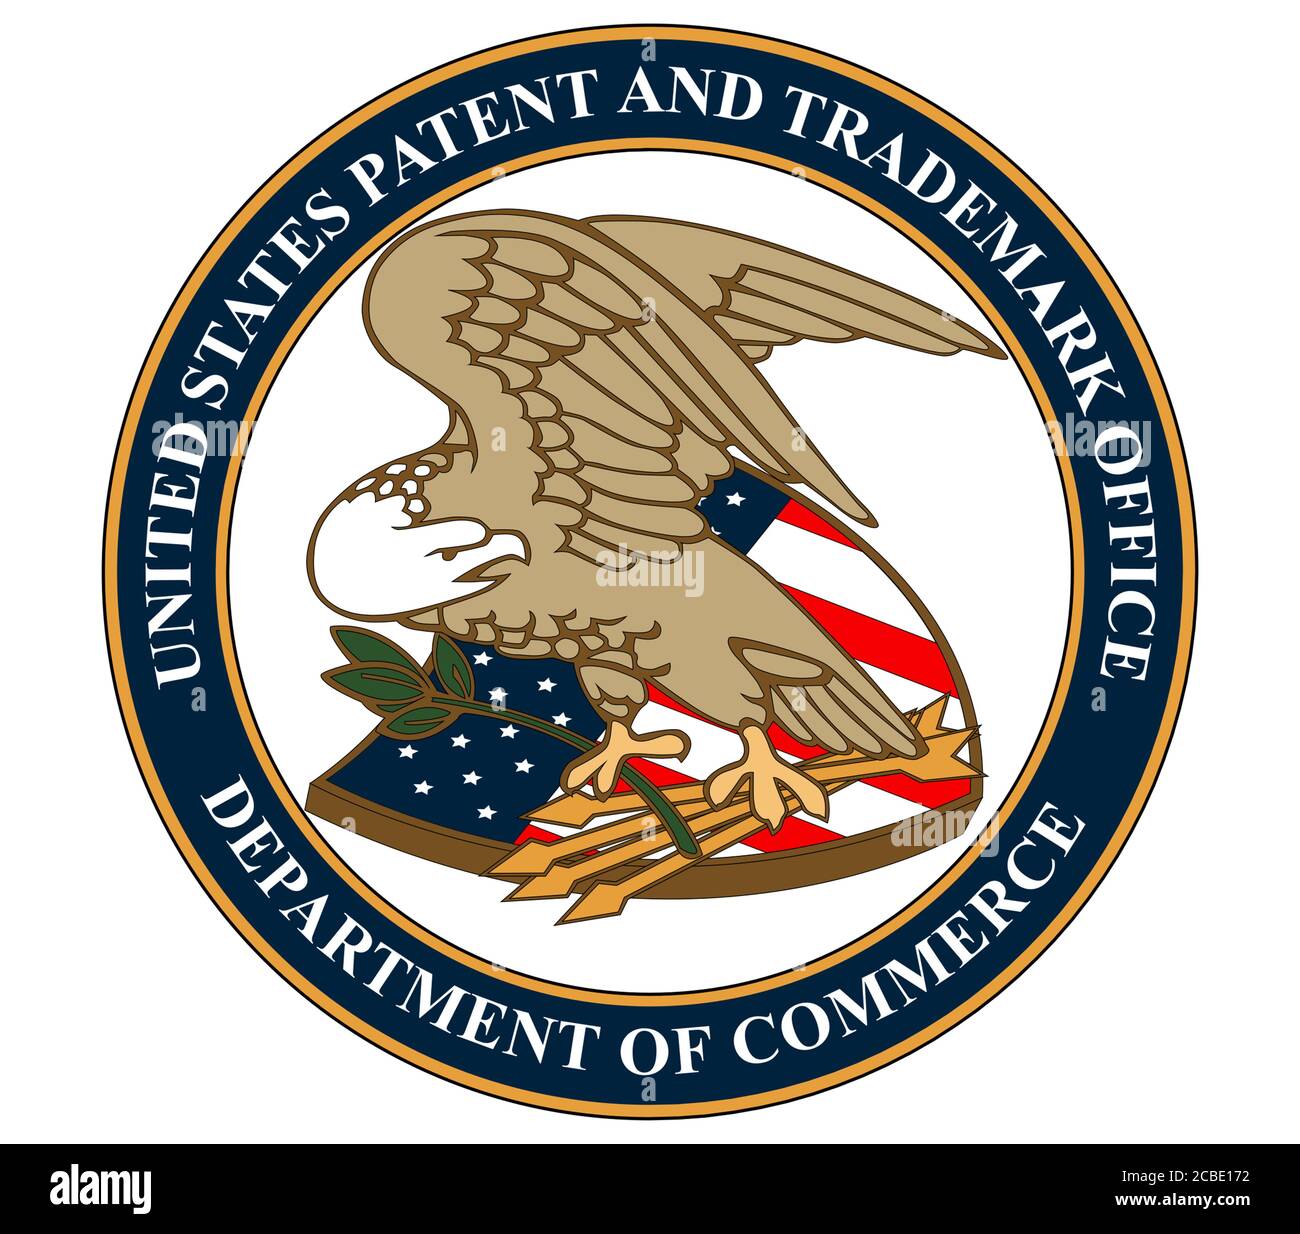 United States Patent and Trademark Office Stockfoto